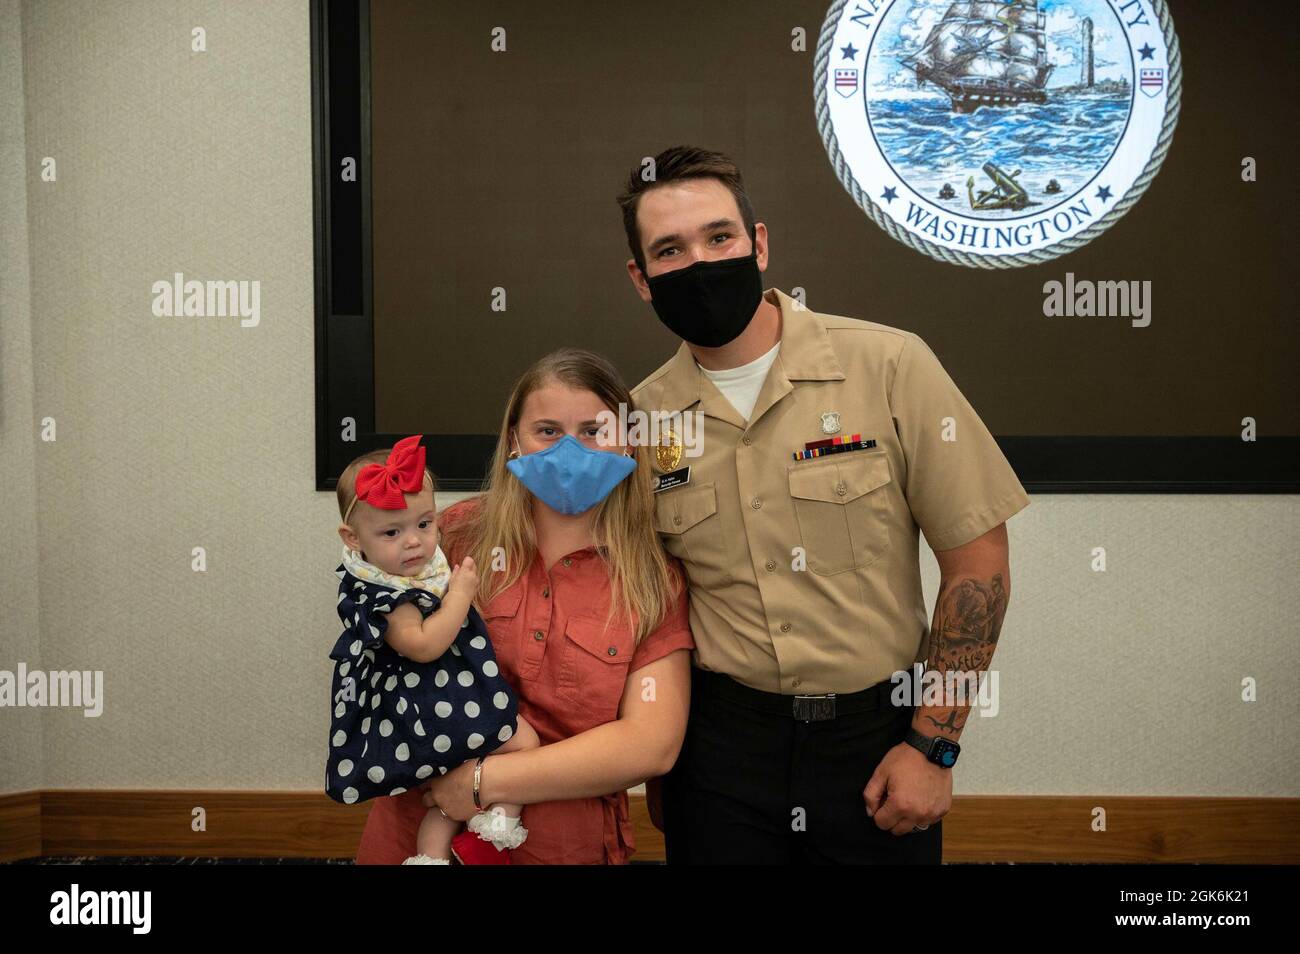 WASHINGTON, DC (Aug. 16, 2021) – Master-at-Arms 3rd Class Griffin Hahn, right, poses with family members before an award ceremony held onboard Washington Navy Yard. Stock Photo